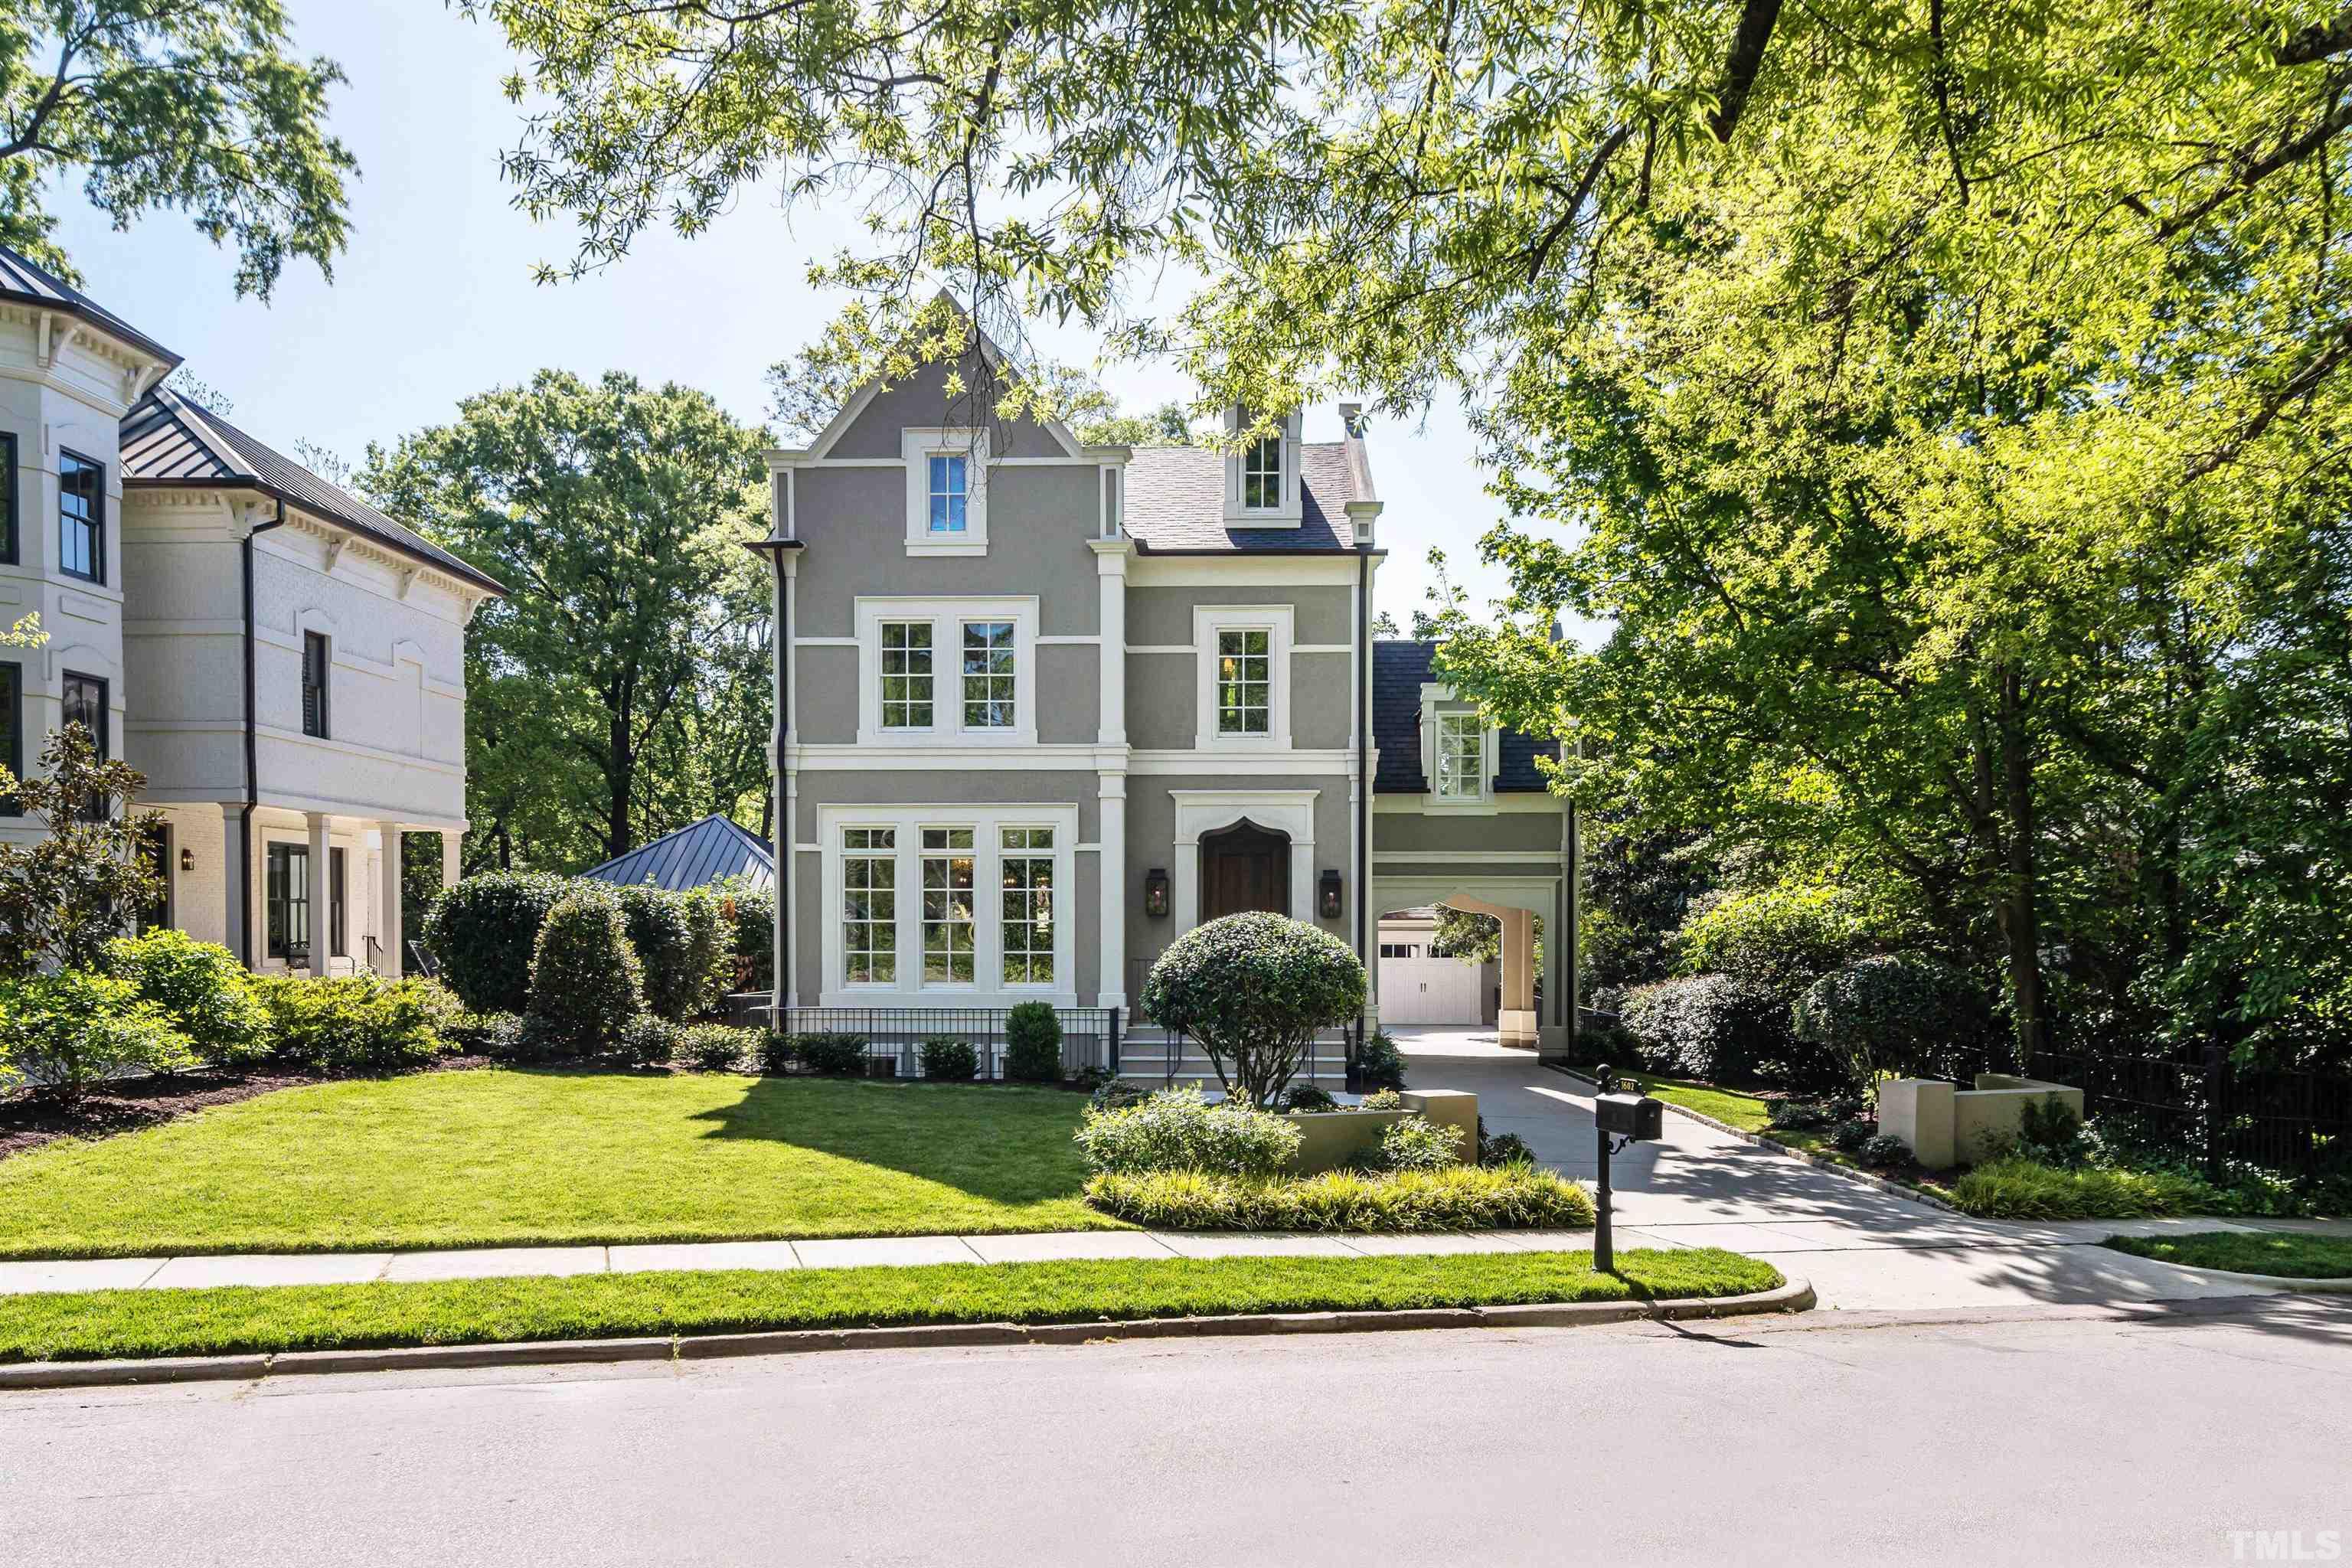 Those for whom neighborhood is important, historic Hayes Barton is among the most prized in Raleigh, if not the entire Triangle.